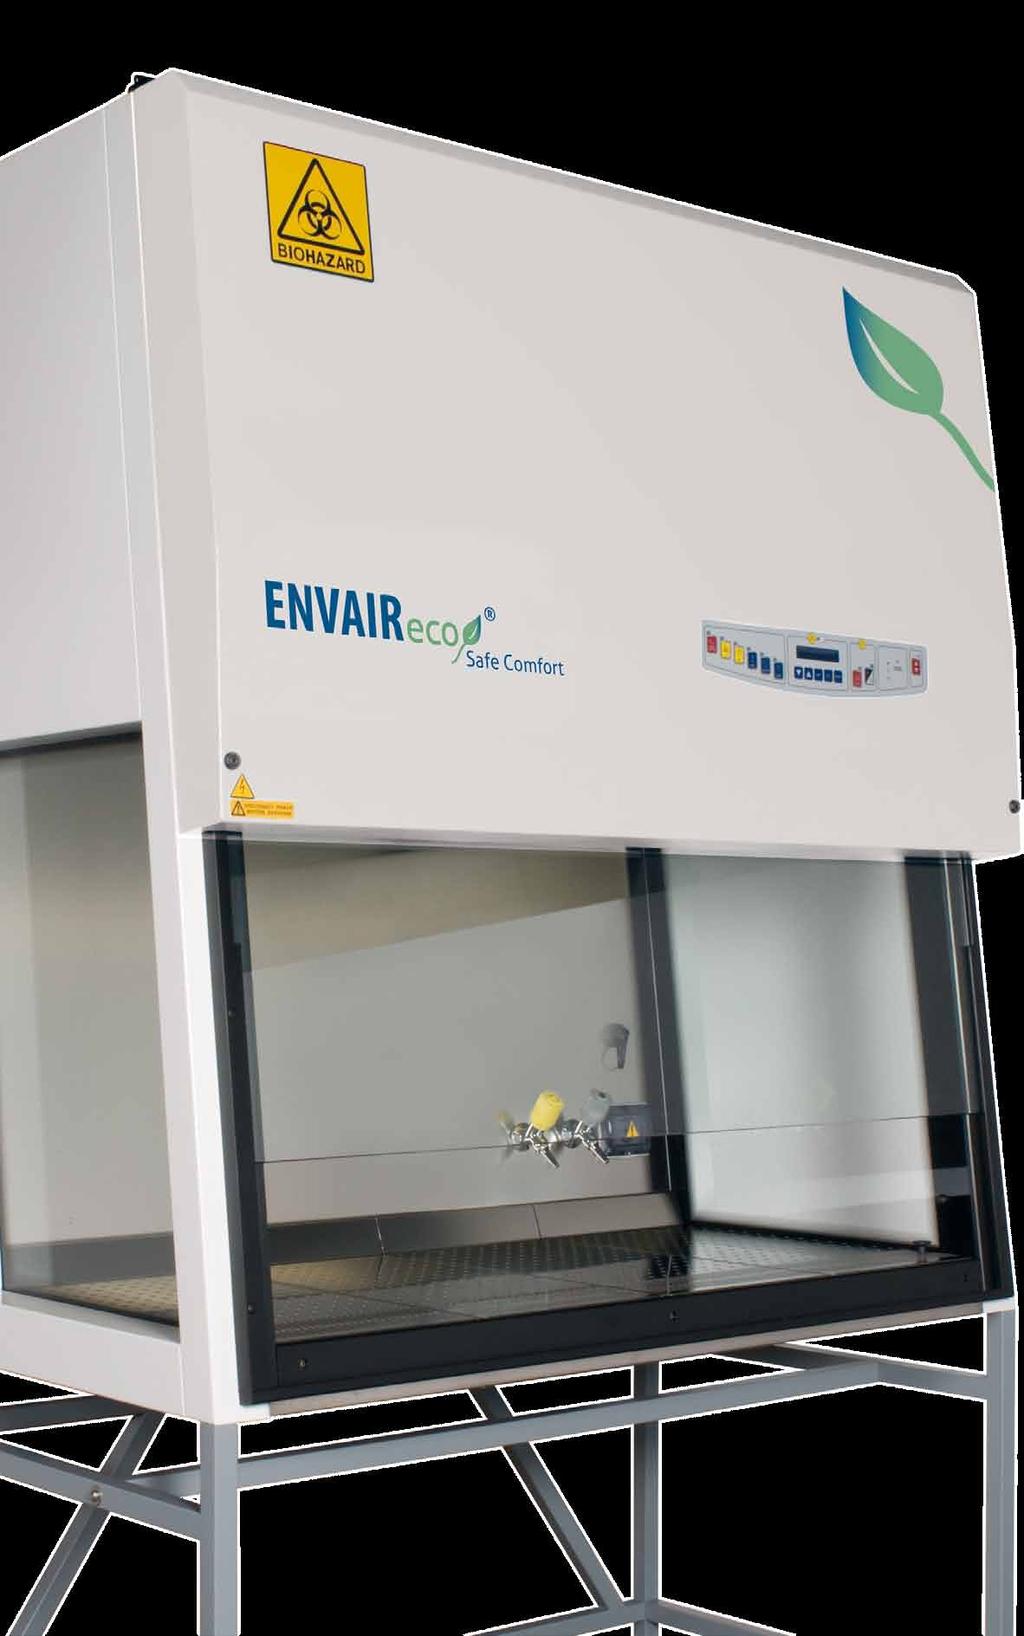 Clean technology for a clean environment ENVAIR eco safe Comfort the clean generation ENVAIR eco safe Comfort Microbiological Safety Cabinets belong to the latest generation of laminar airflow